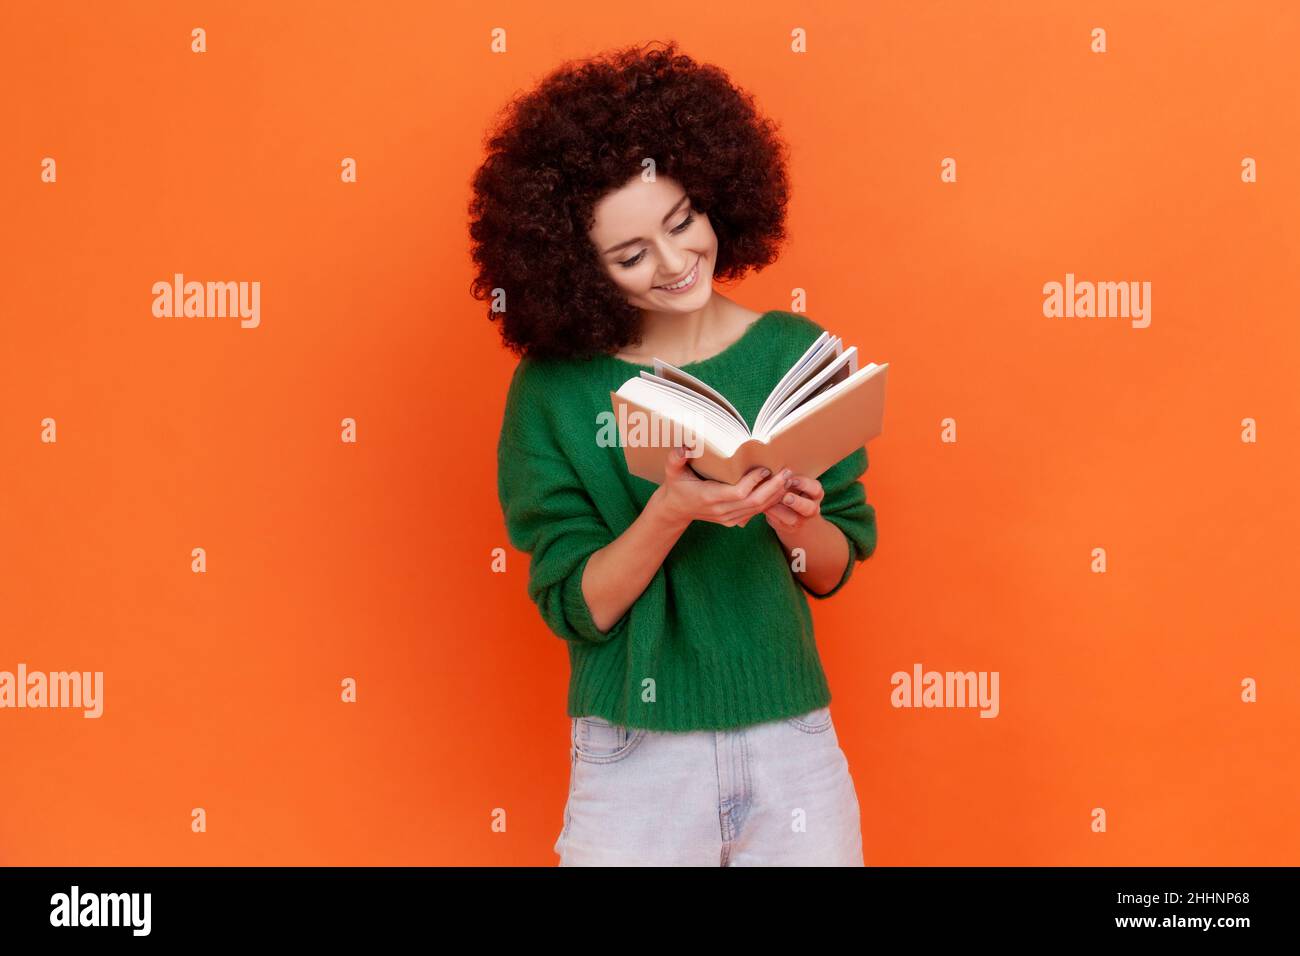 Happy smiling woman with Afro hairstyle wearing green casual style sweater reading book with interesting plot, studying with pleasure. Indoor studio shot isolated on orange background. Stock Photo